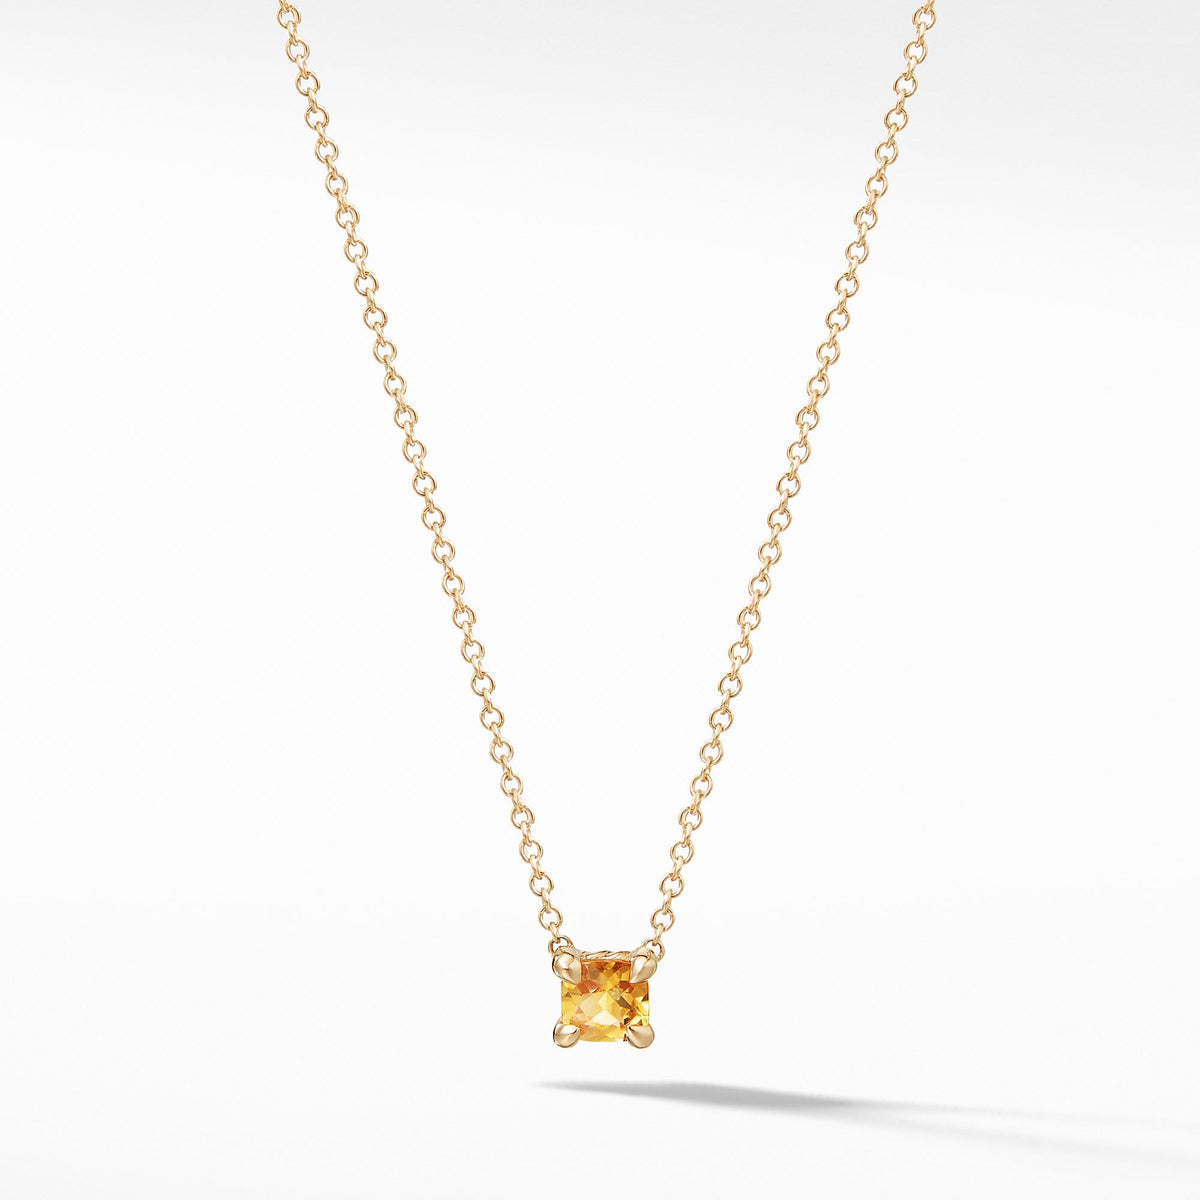 Chatelaine Kids Necklace with Citrine in 18K Gold, 4mm